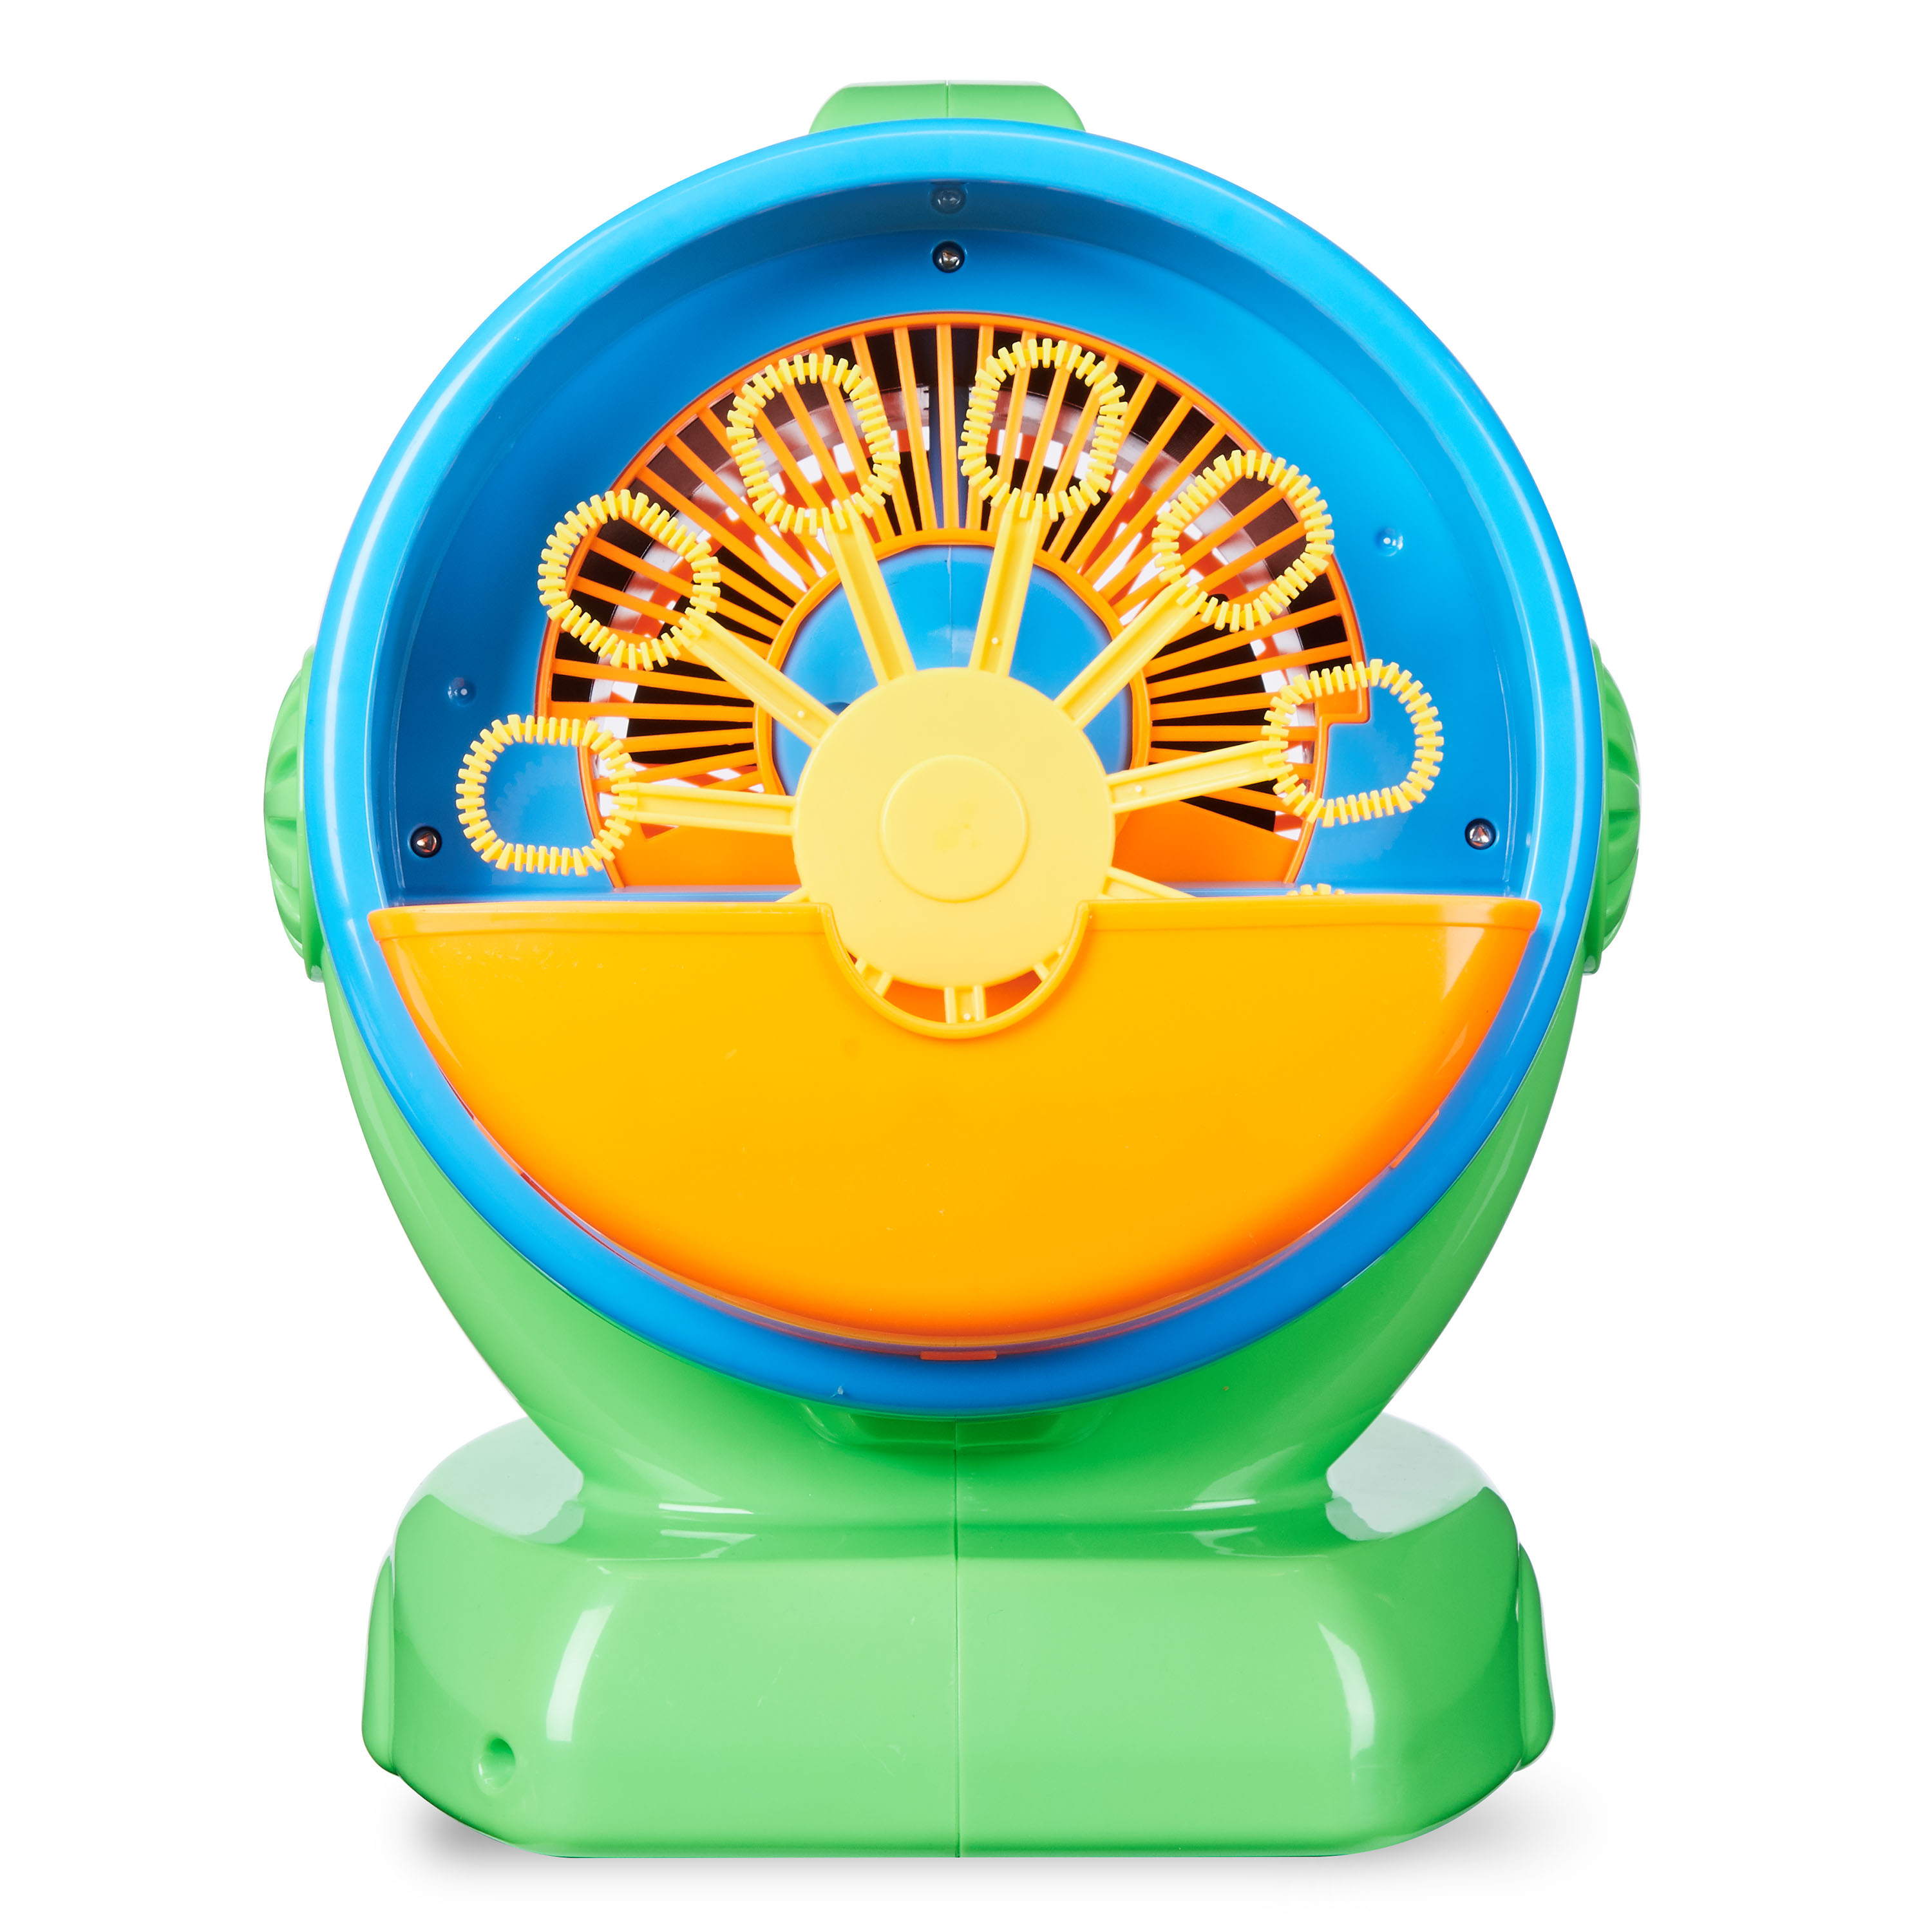 Play Day Mega Bubble Blower, Battery Operated, Bubble Blowing Toy Machine - image 1 of 7